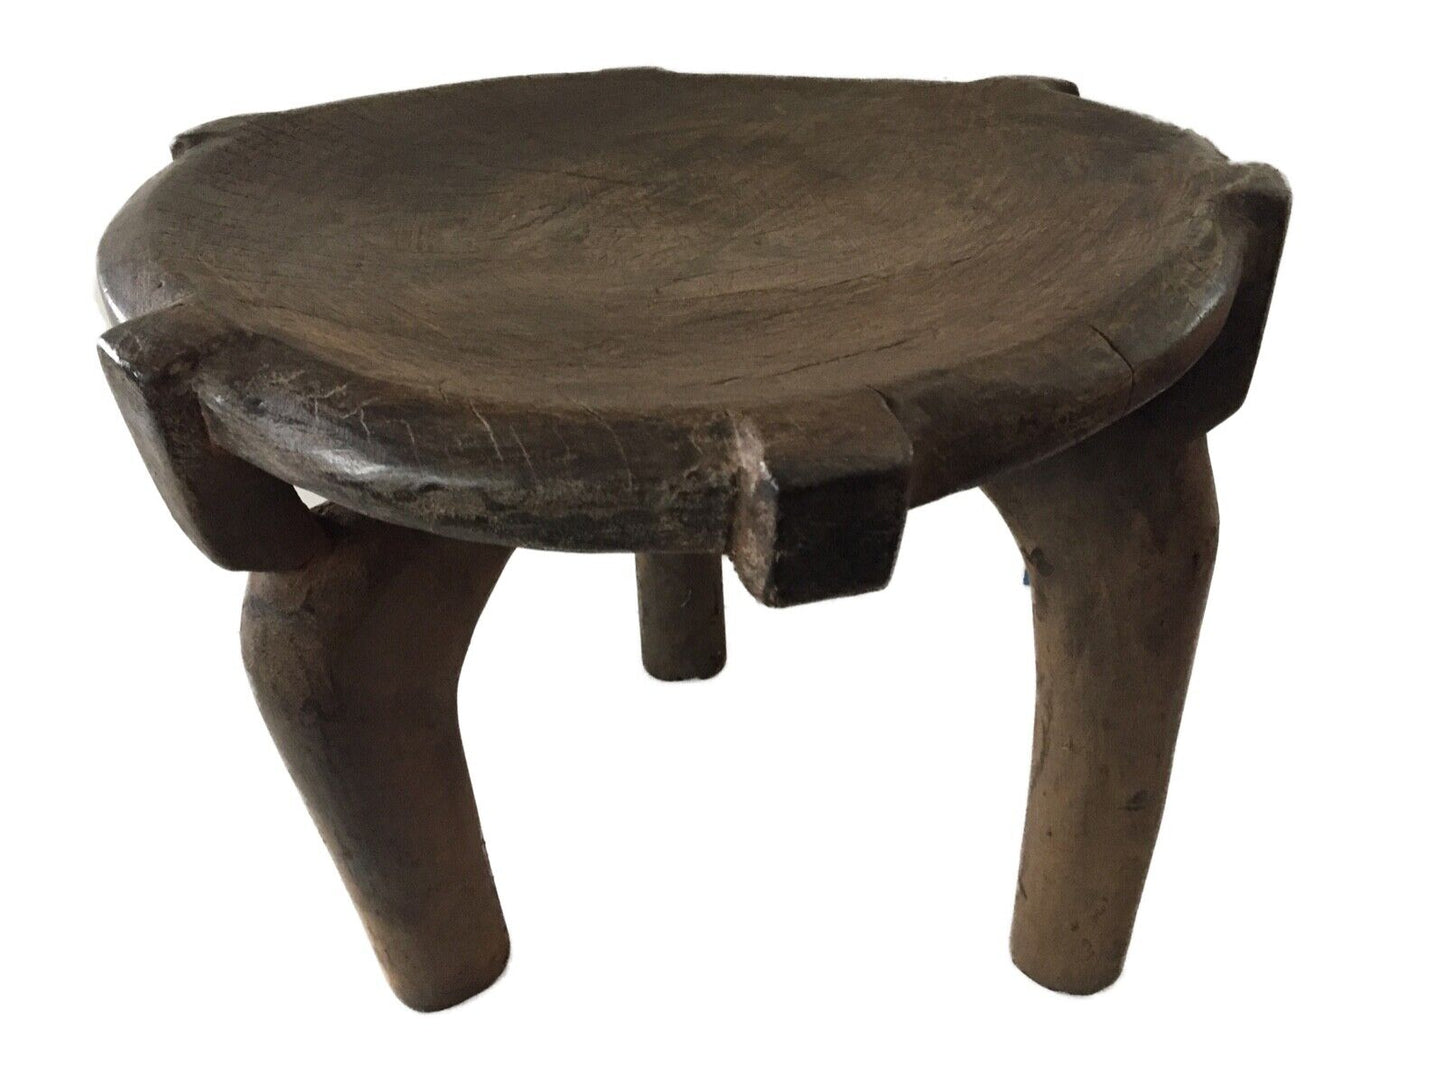 # 2012/90 African Old  Wood Milk Stool Hehe Gogo People Tanzania 14" H by 18" D